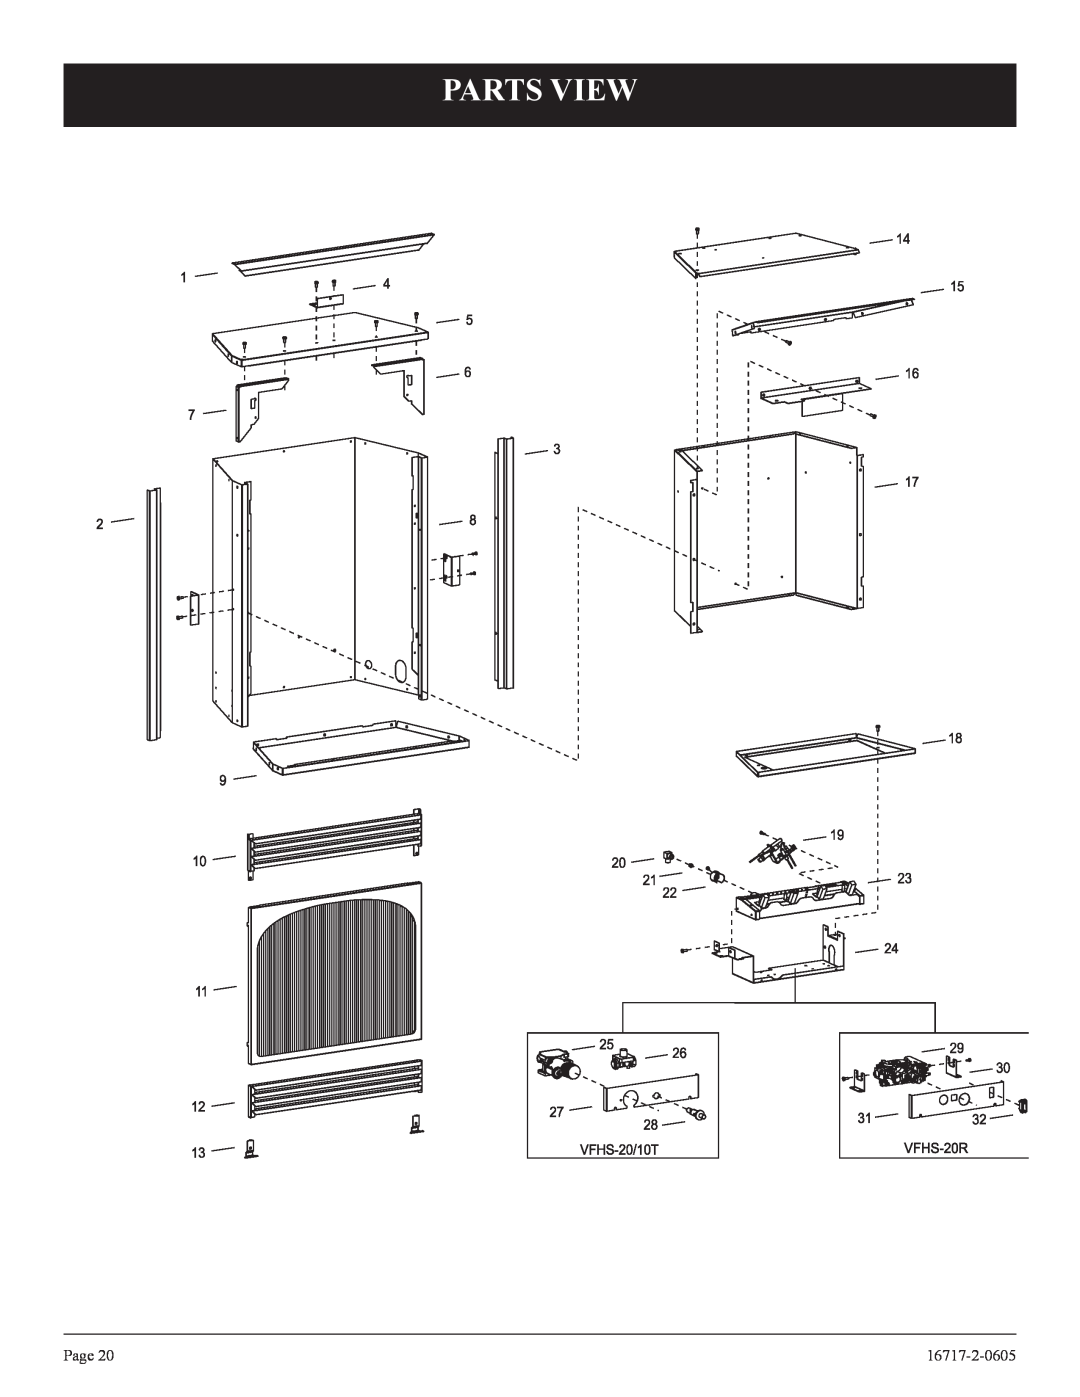 Empire Comfort Systems VFHS-20R-4, VFHS-20/10T-4 installation instructions Parts View, Page, 16717-2-0605 